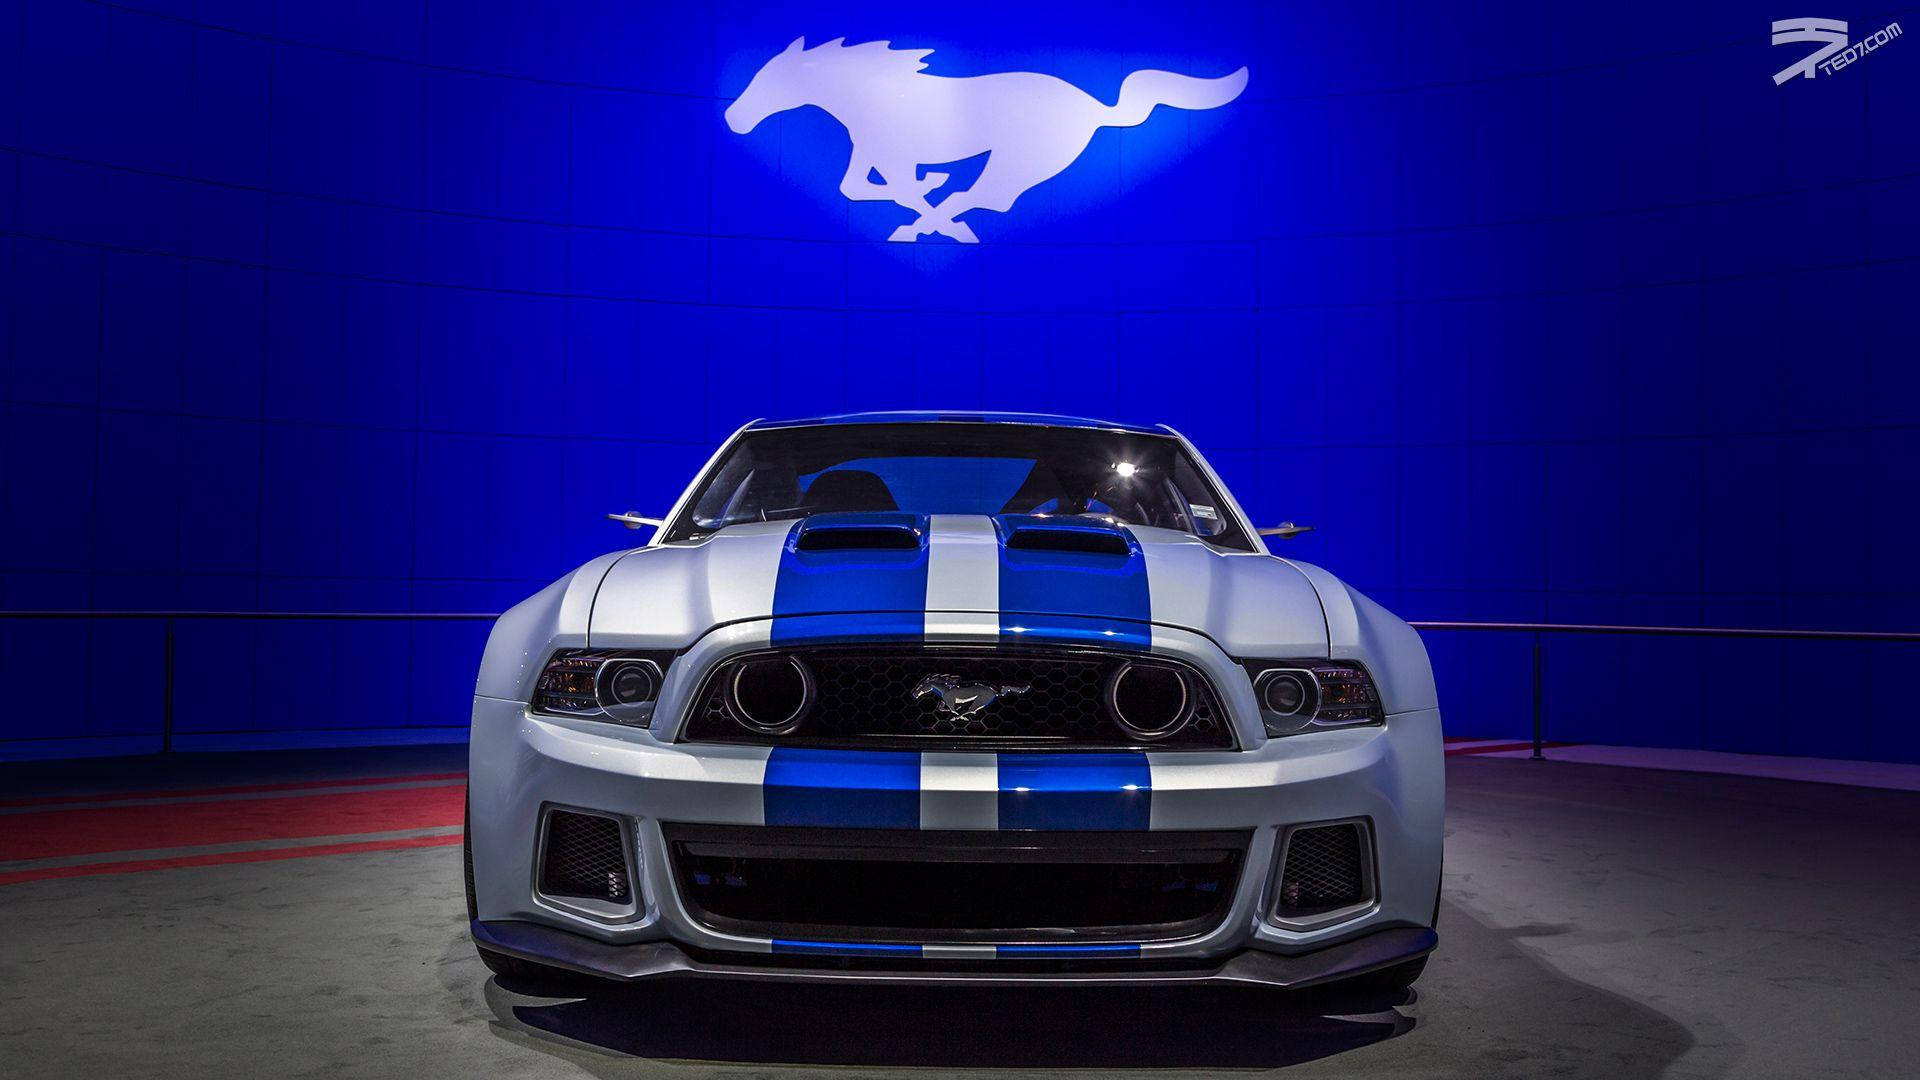 Blue Striped Ford Mustang Wallpaper